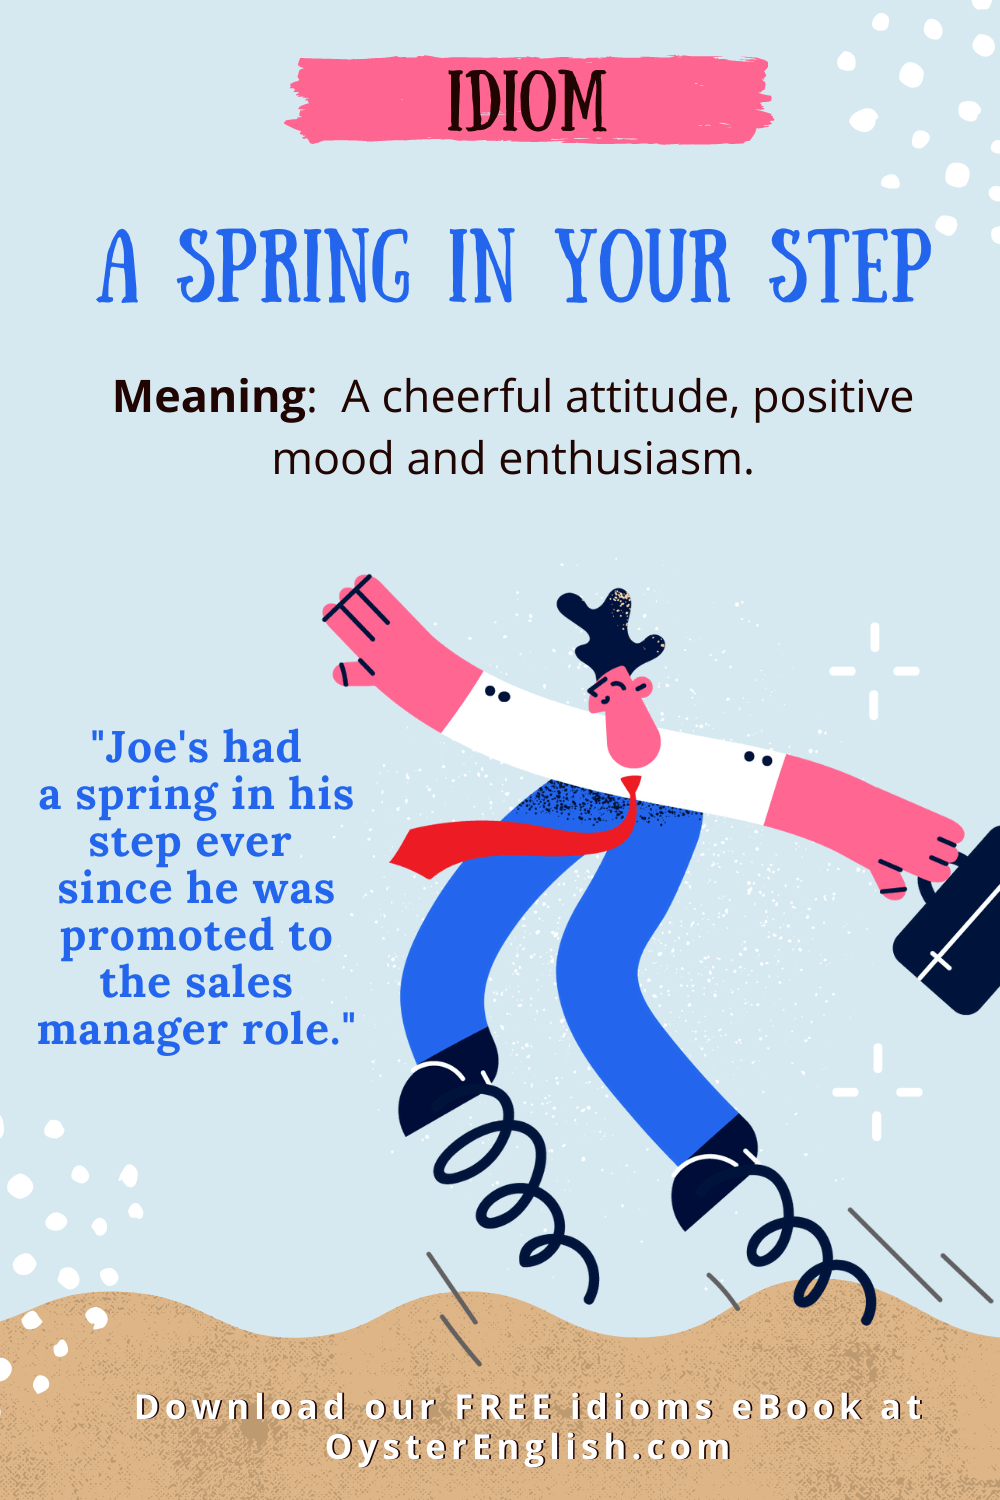 A businessman with springs on his shoes is happily leaping as he walks. Caption: "Joe's had a spring in his step ever since he was promoted to the sales manager role."